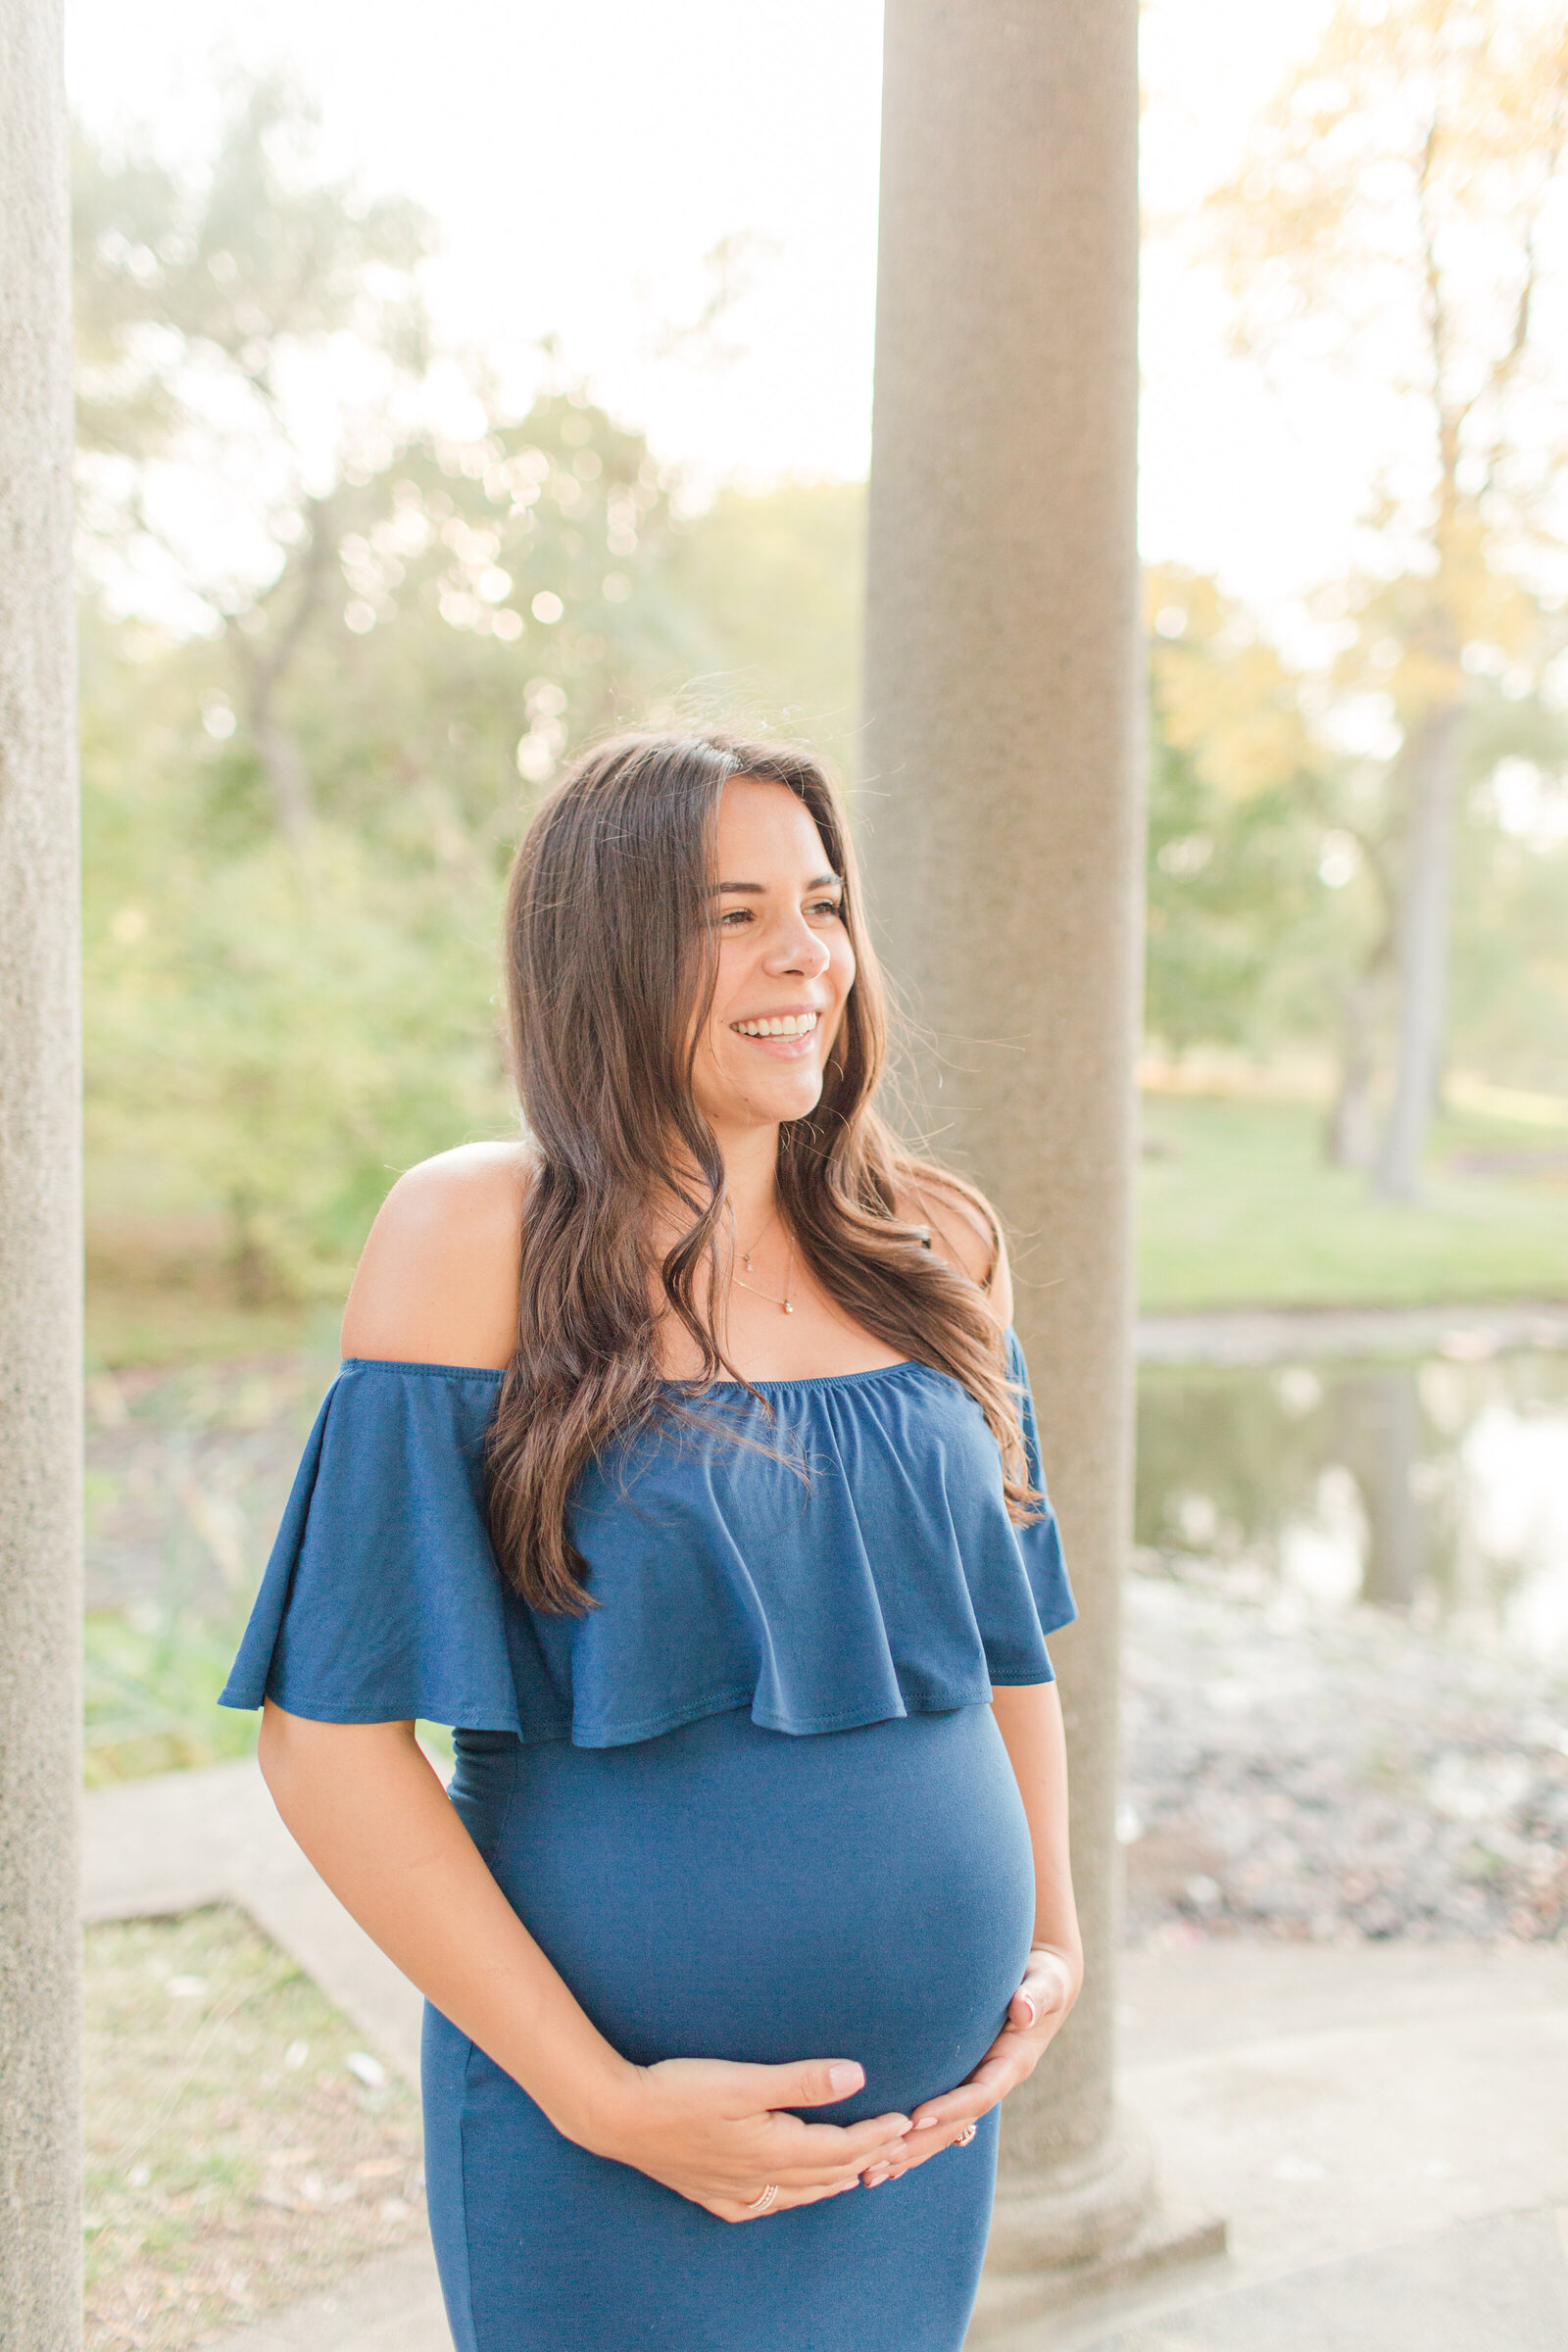 Boston Maternity Session at Larz Anderson Park with Corinne Isabelle Photography